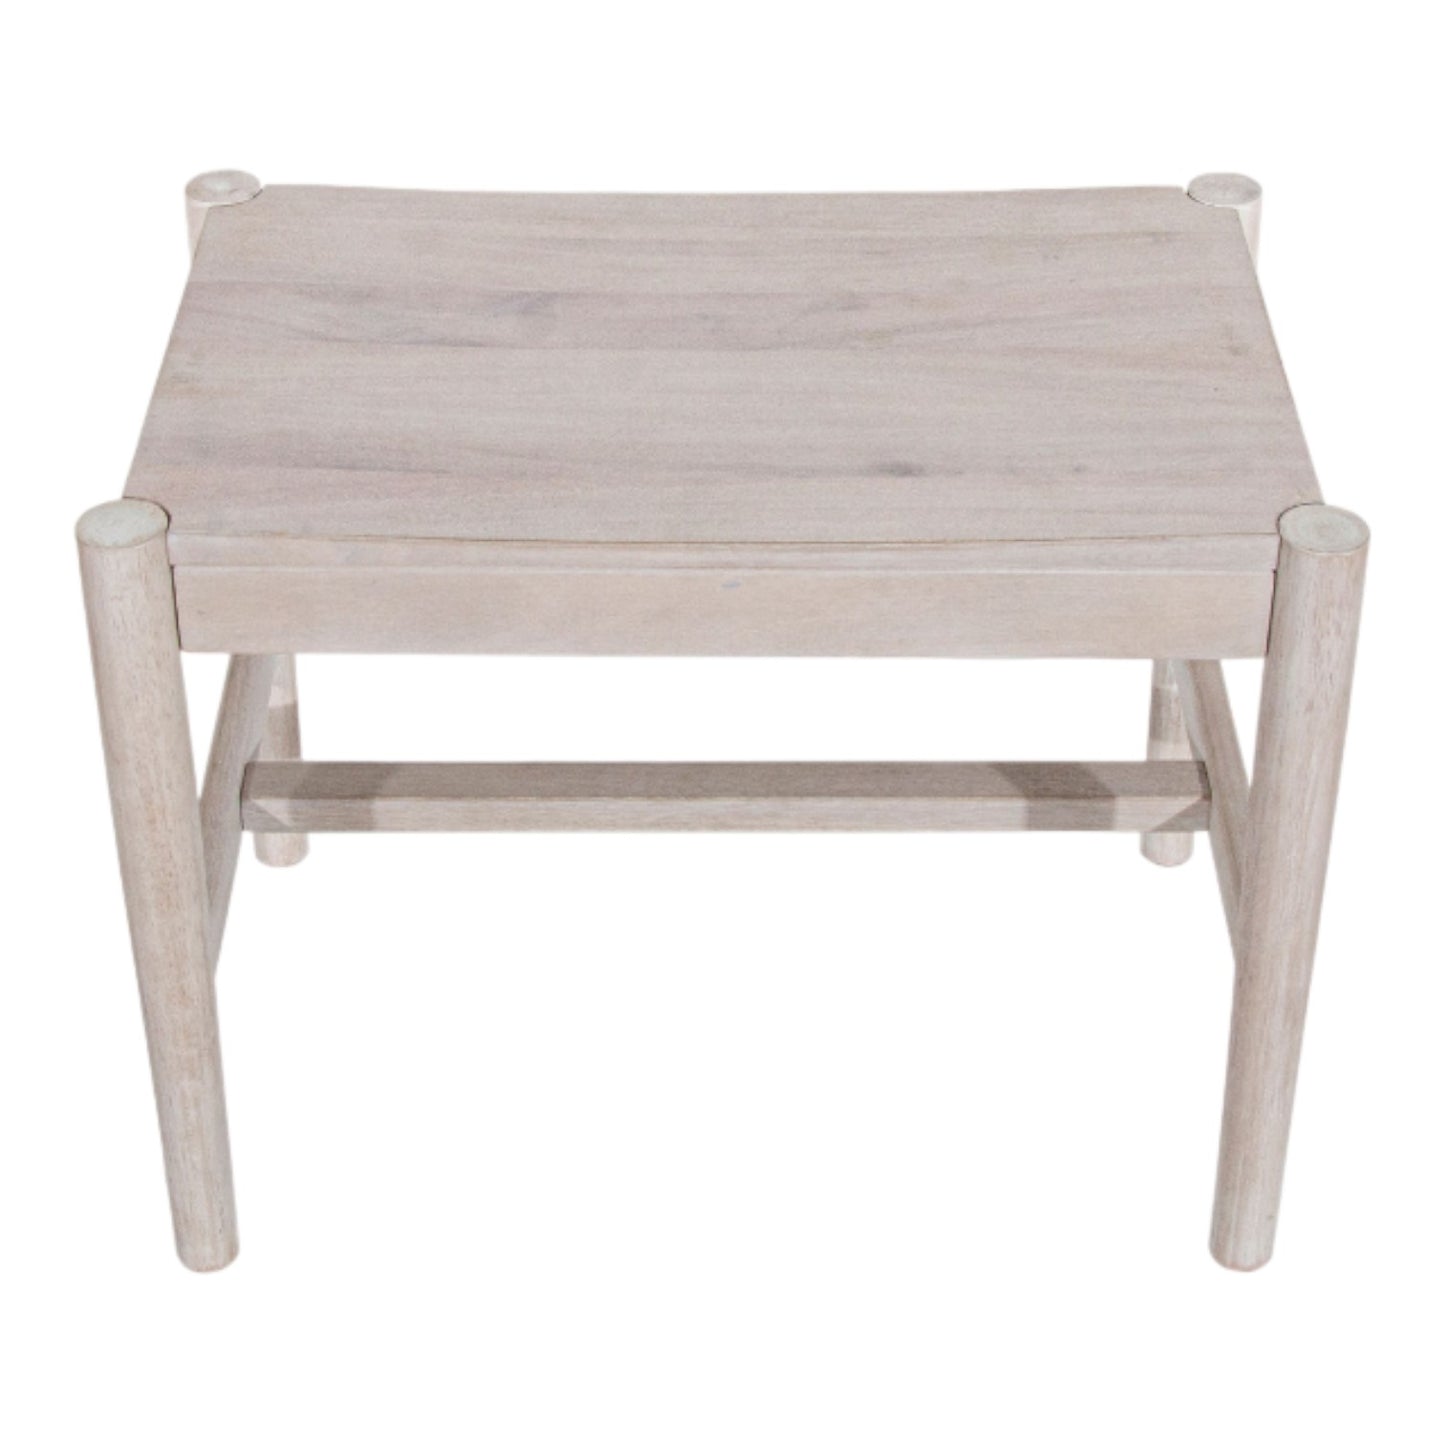 Picture of Jira 22" Single Seat Bench White